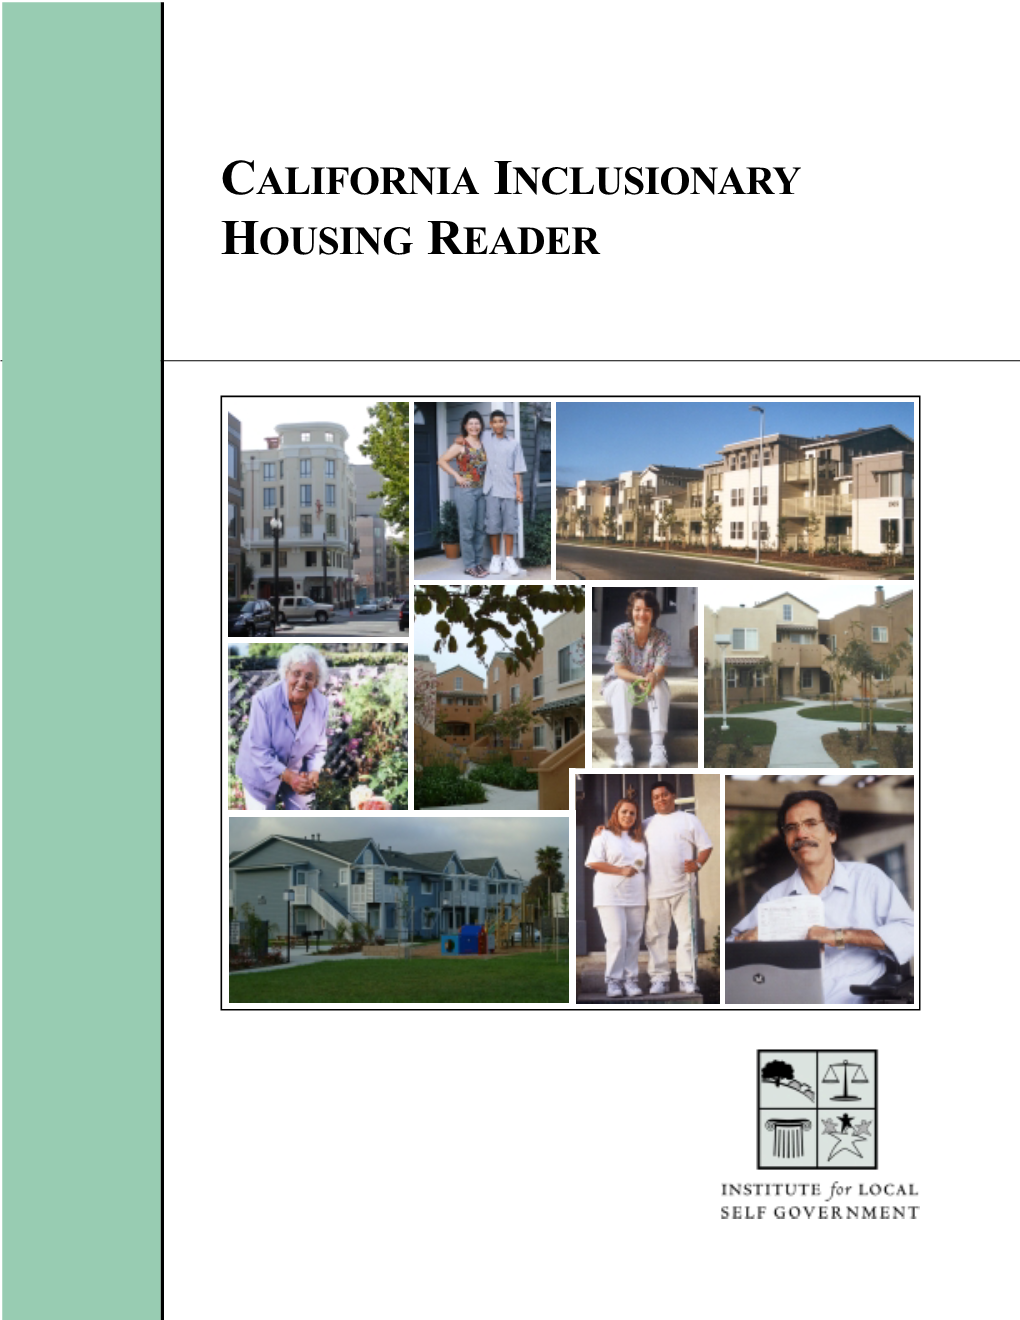 CALIFORNIA INCLUSIONARY HOUSING READER the Institute for Local Self Government Is the Nonprofit Research Arm of the League of California Cities